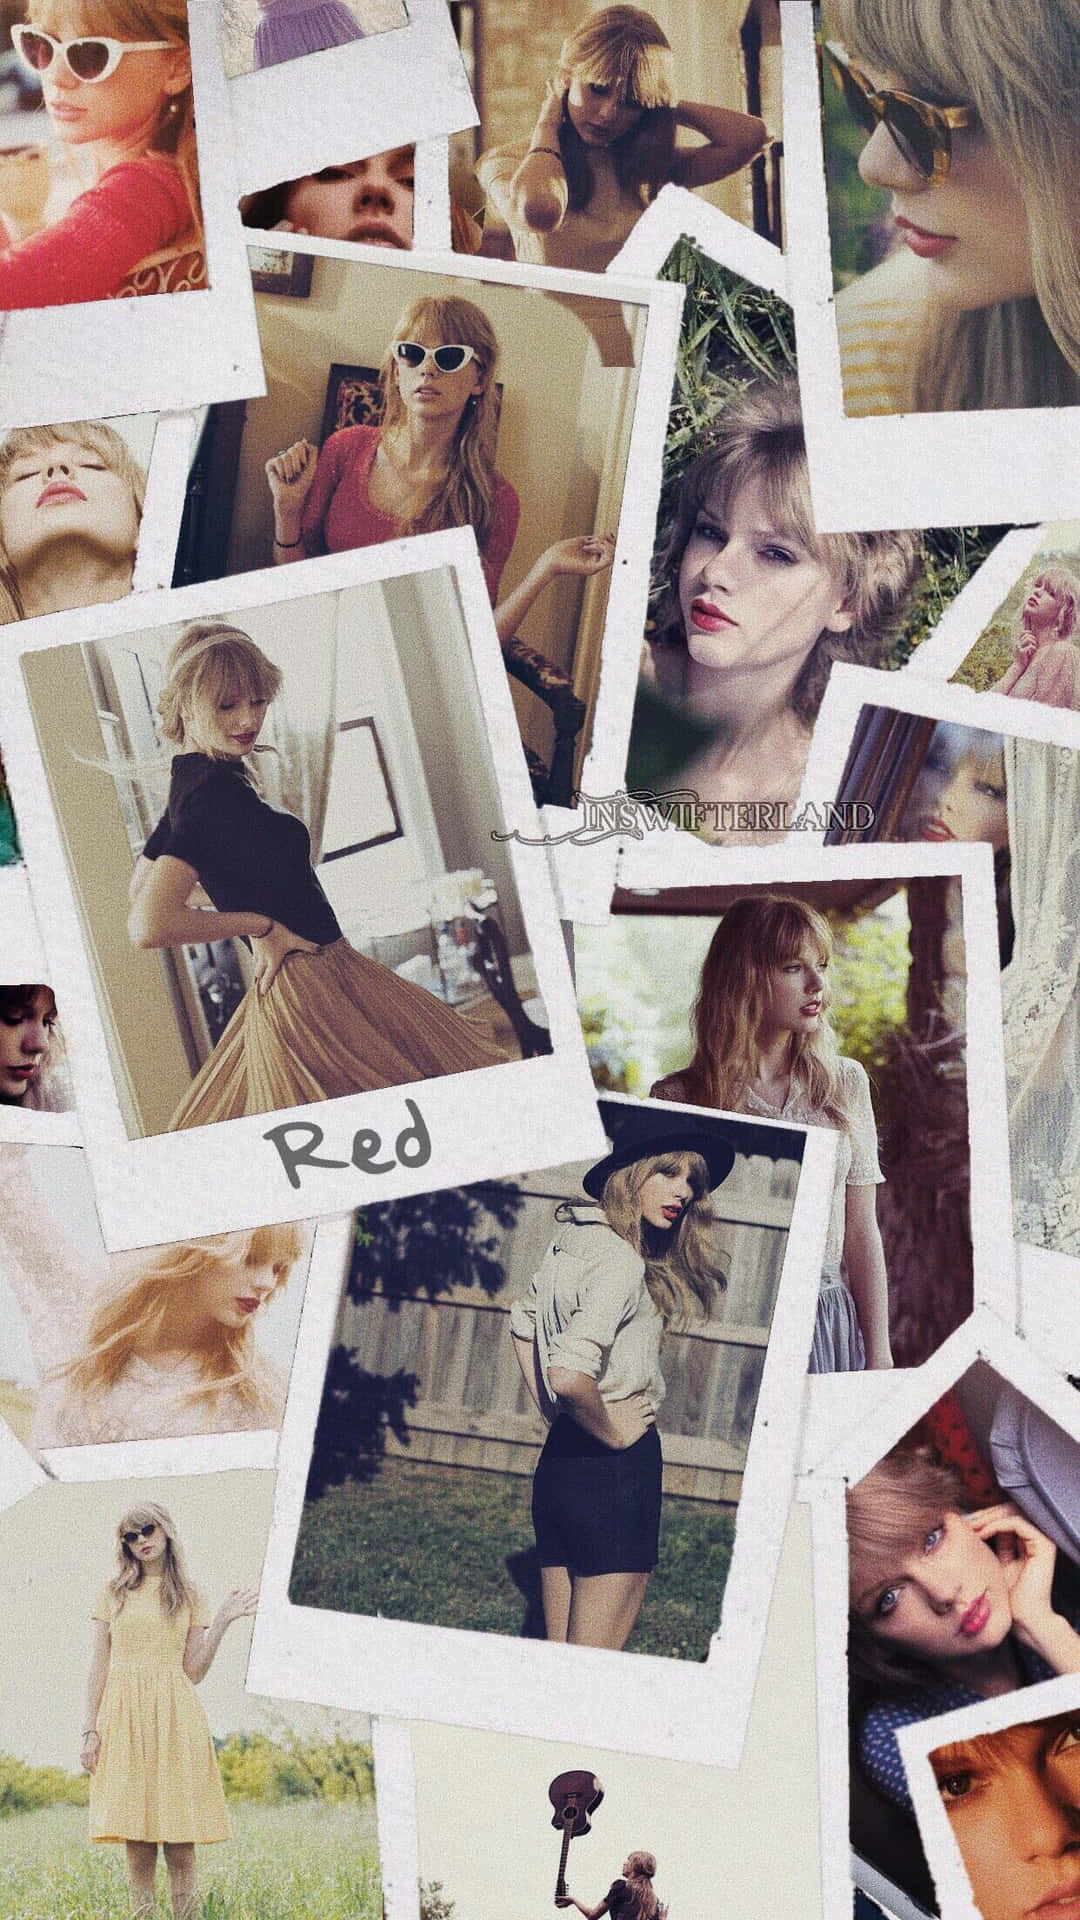 Red Taylor's Version - completely reconstructed and remastered. Wallpaper